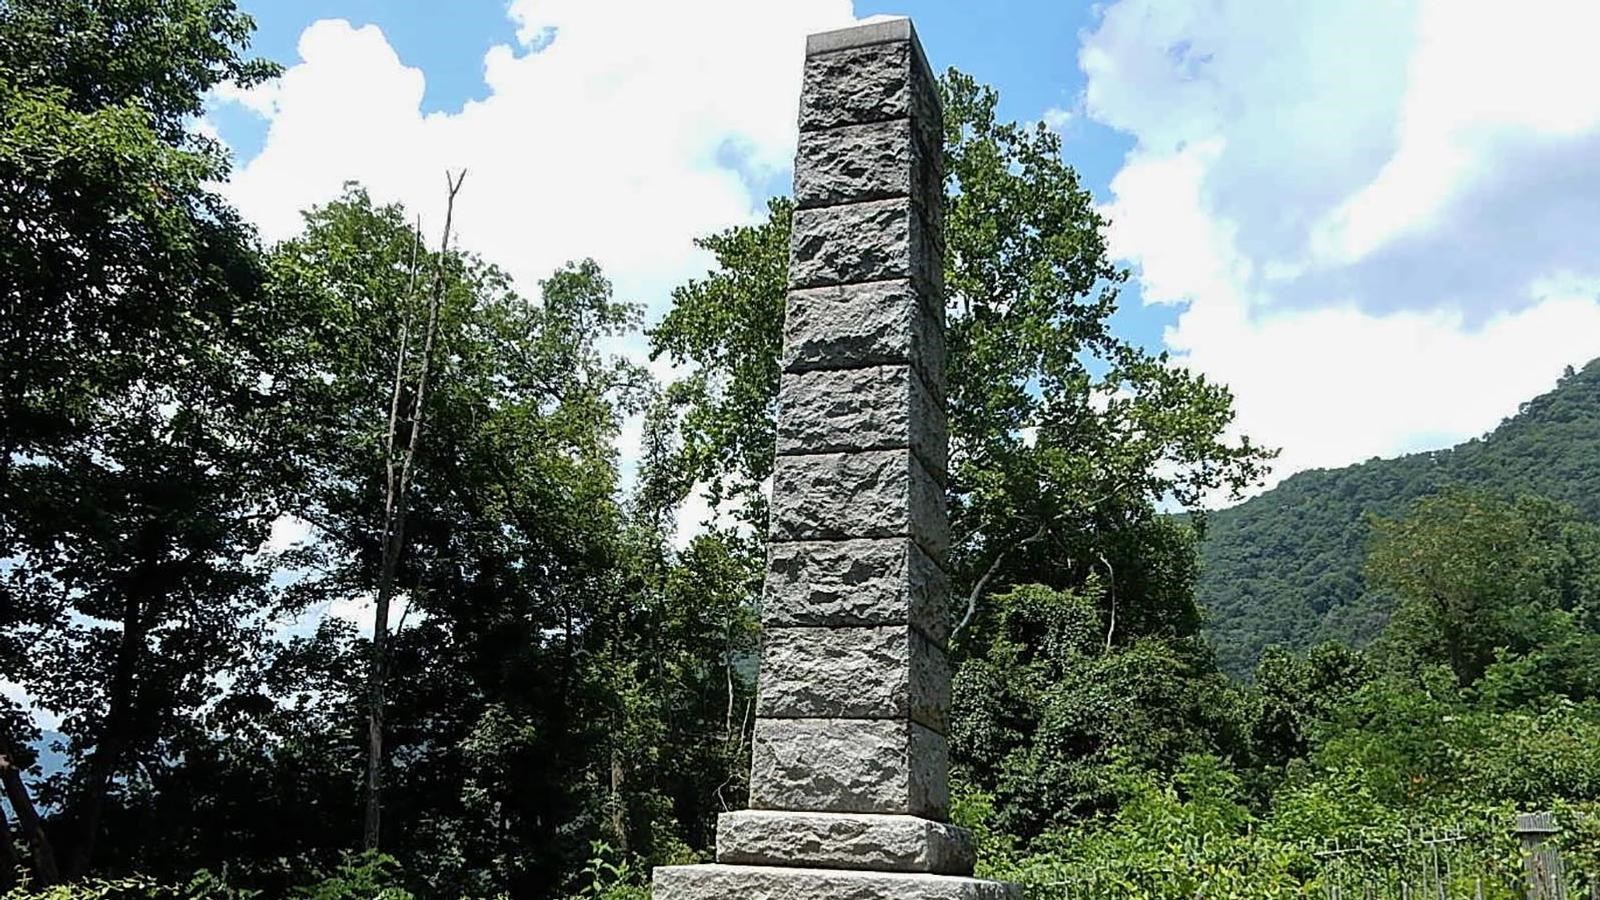 granite monument in a forested setting